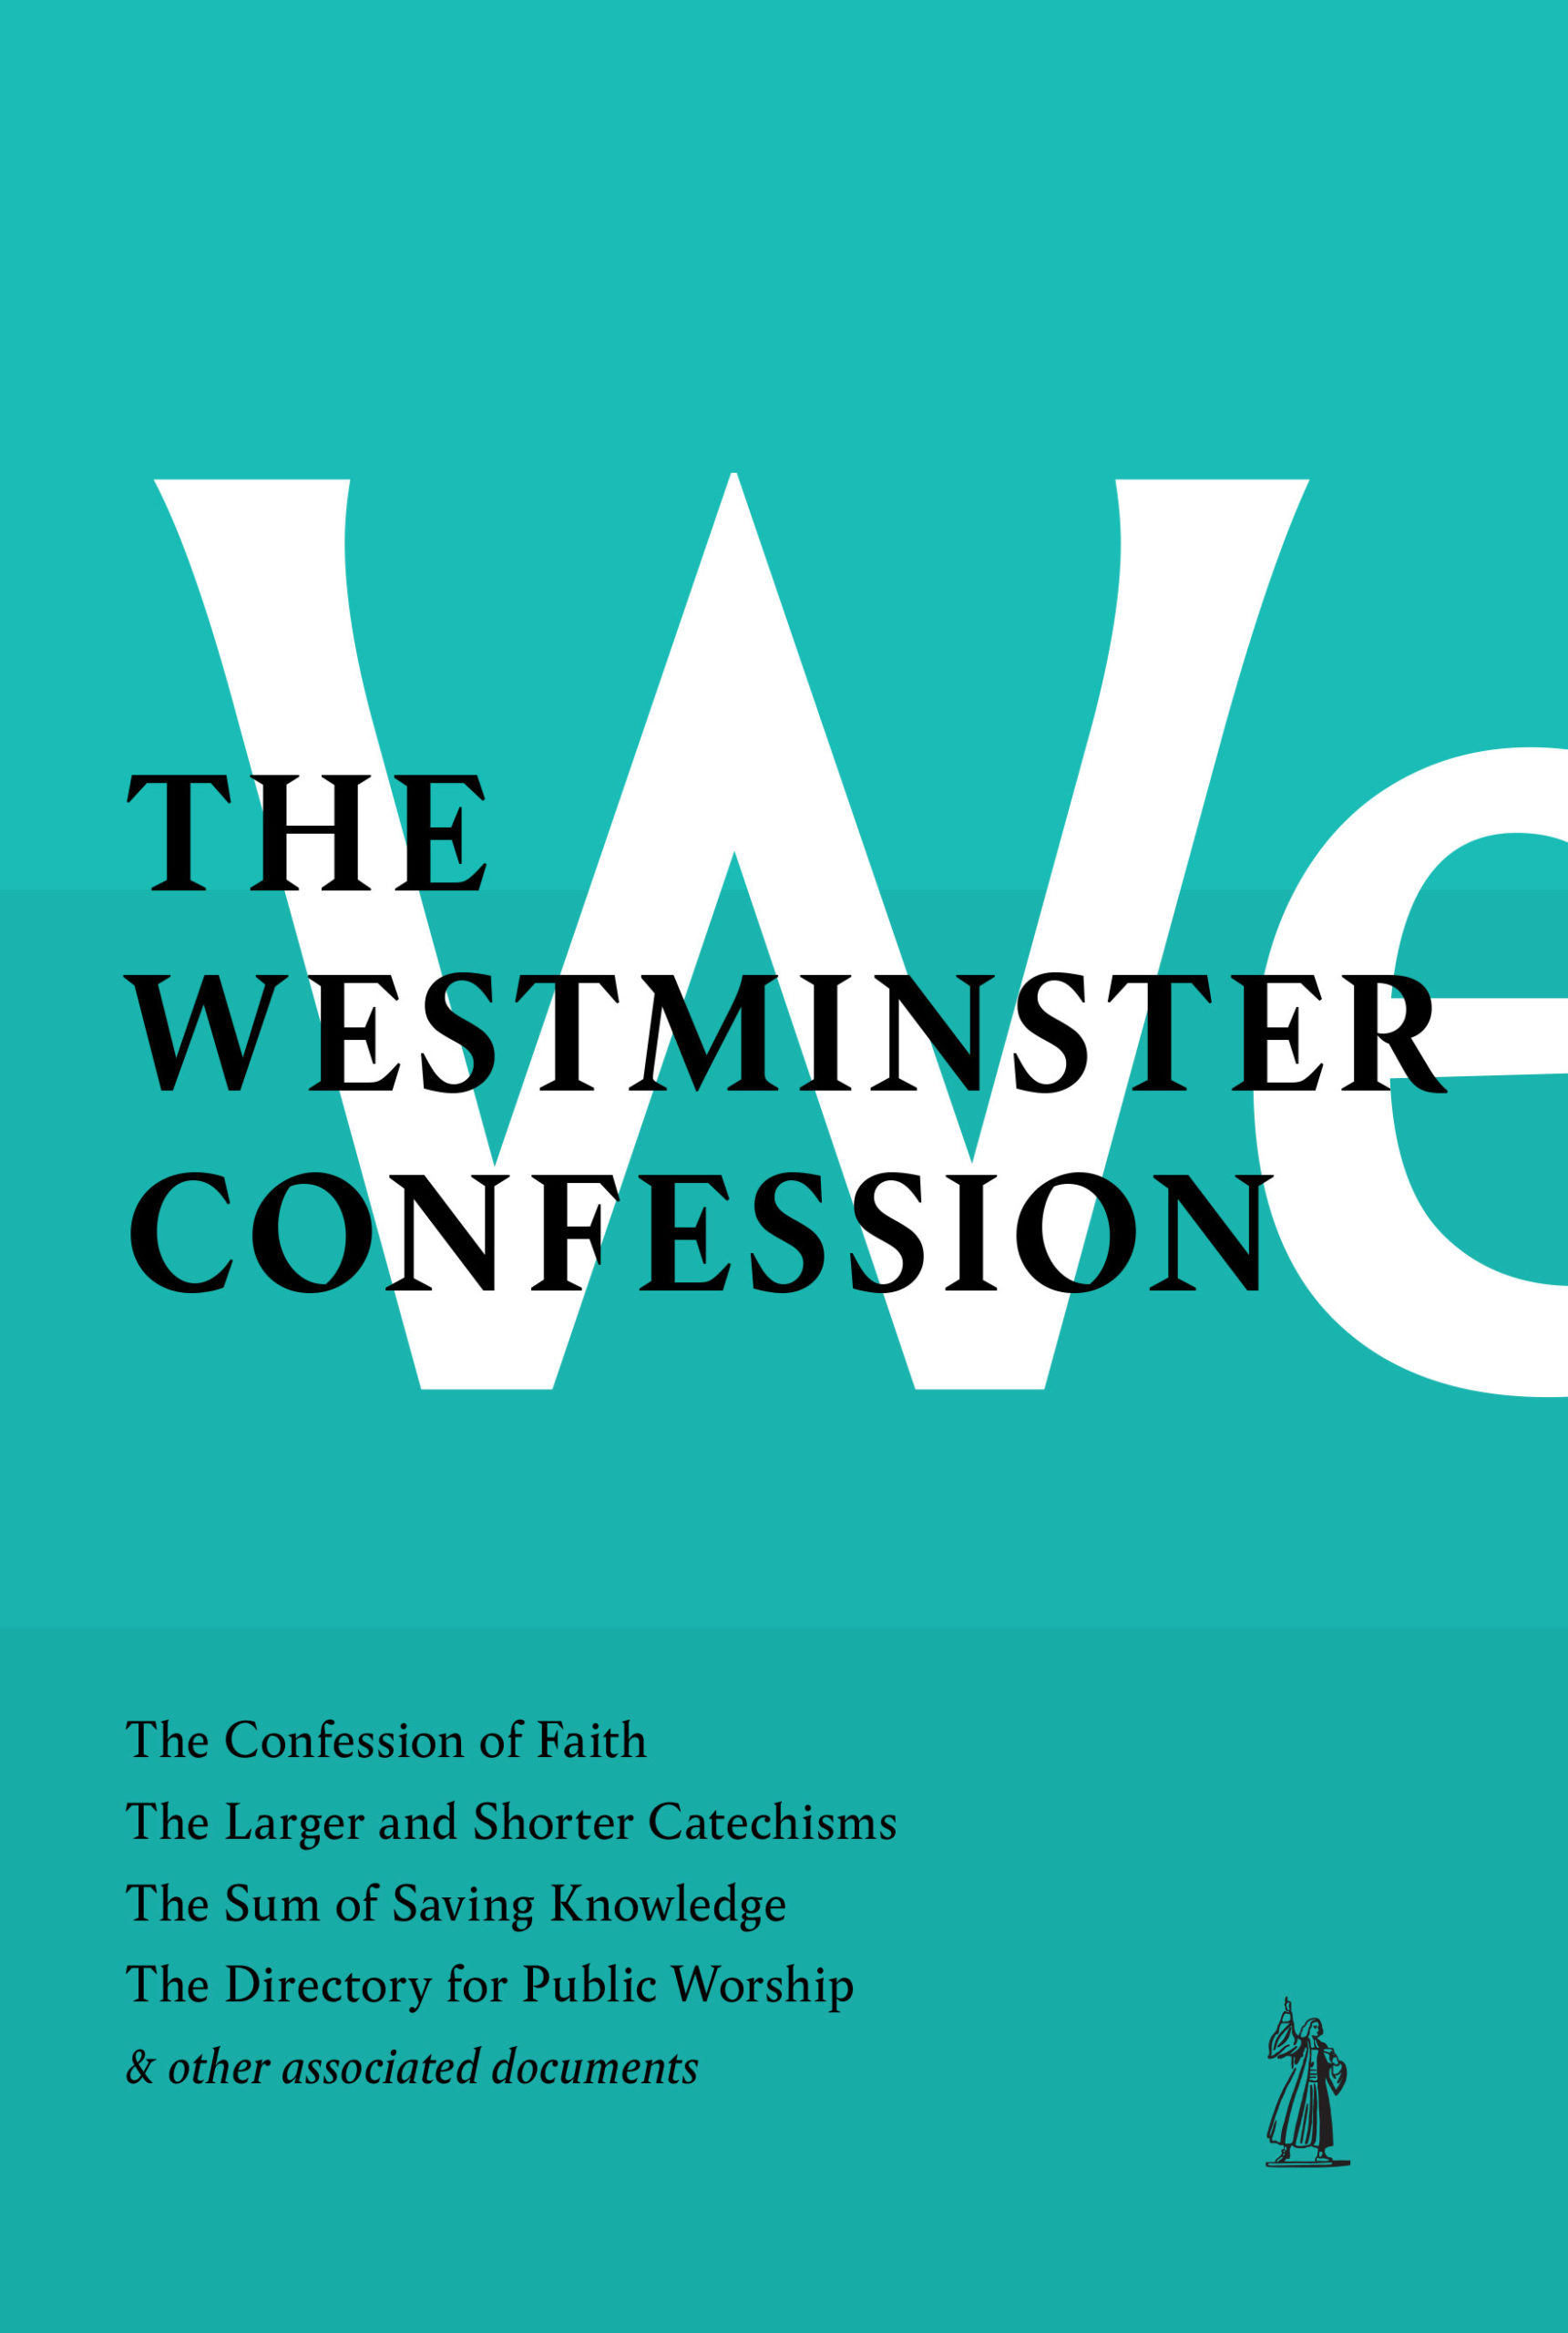 cover image for the Westminster Confession